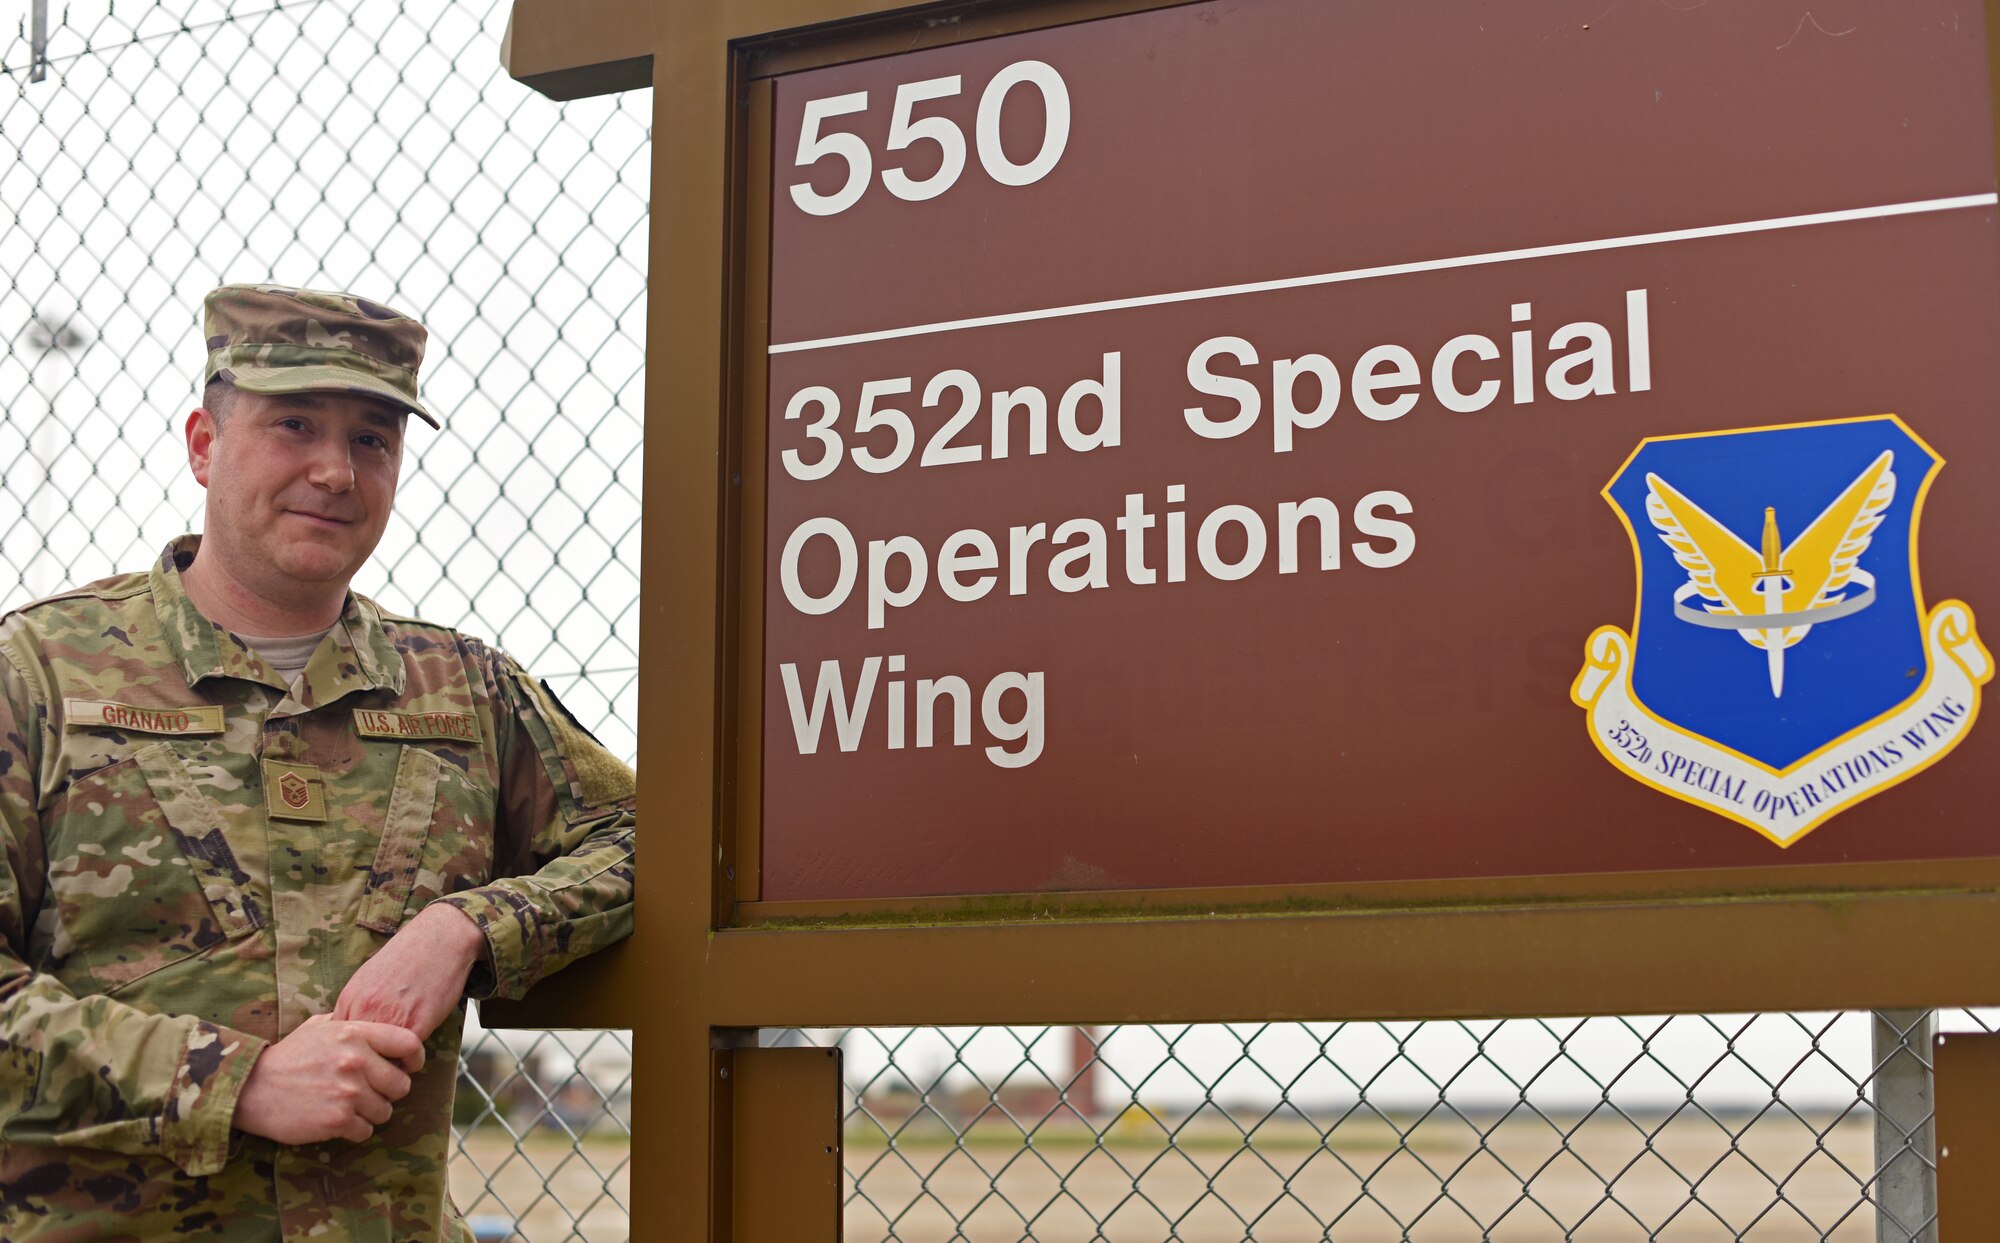 U.S. Air Force Master Sgt. Michael Granato, 752nd SOAMXS first sergeant, poses for a photo at RAF Mildenhall, England, March 8, 2019. Granato, a former avionics Airman, began his first sergeant career at Joint Base Elemendorf-Richardson, Alaska with the 3rd Operations Support Squadron before heading over to RAF Mildenhall, England. (U.S. Air Force photo by Airman 1st Class Brandon Esau)